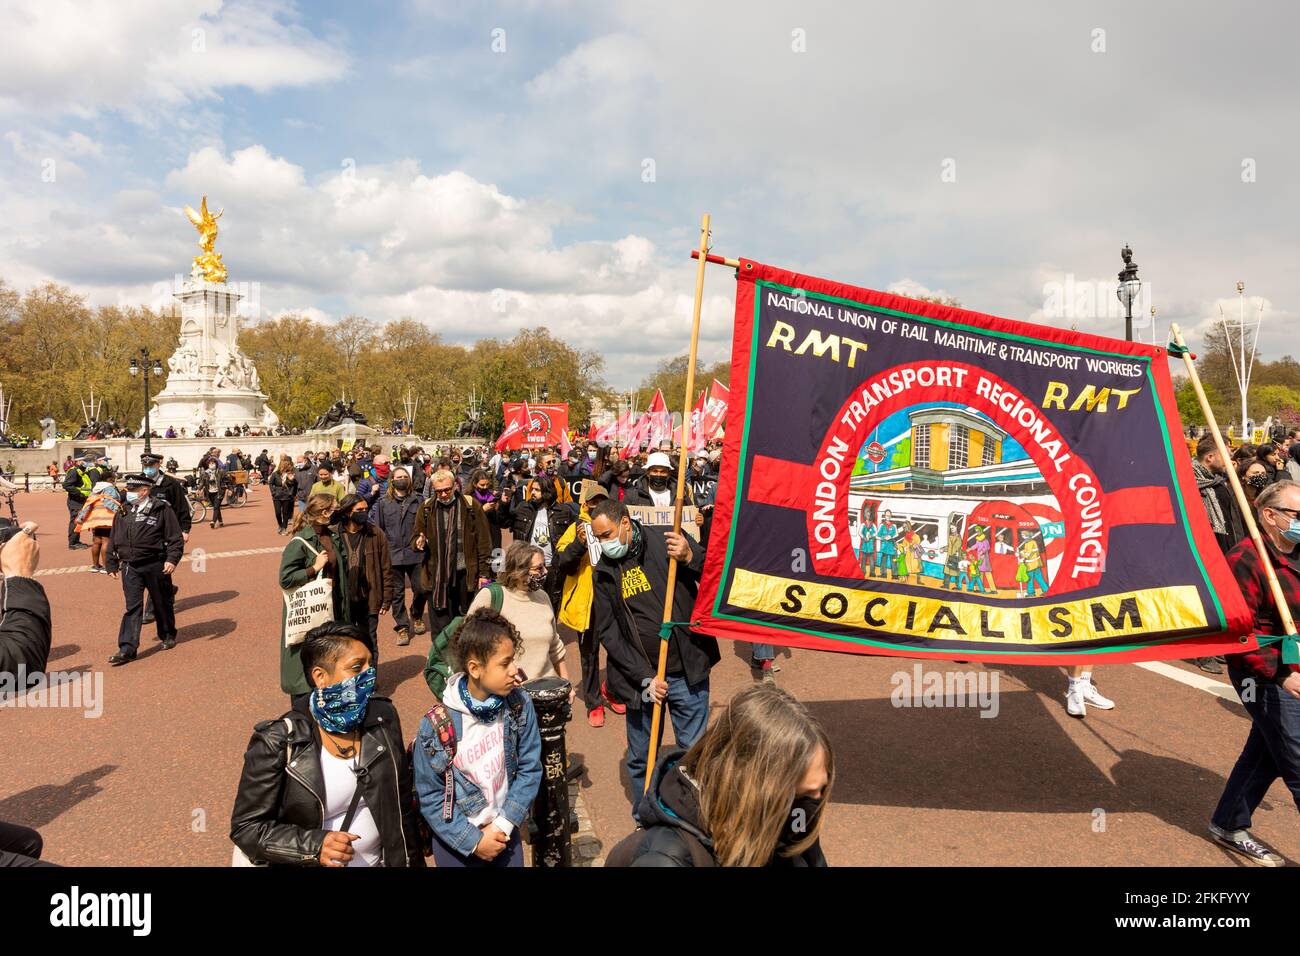 London boroughs took part in the 'Kill the Bill' protests, fighting against the Policing and Crime Bill and police powers, outside Buckingham Palace. (Photo by Belinda Jiao / SOPA Images/Sipa USA) Stock Photo